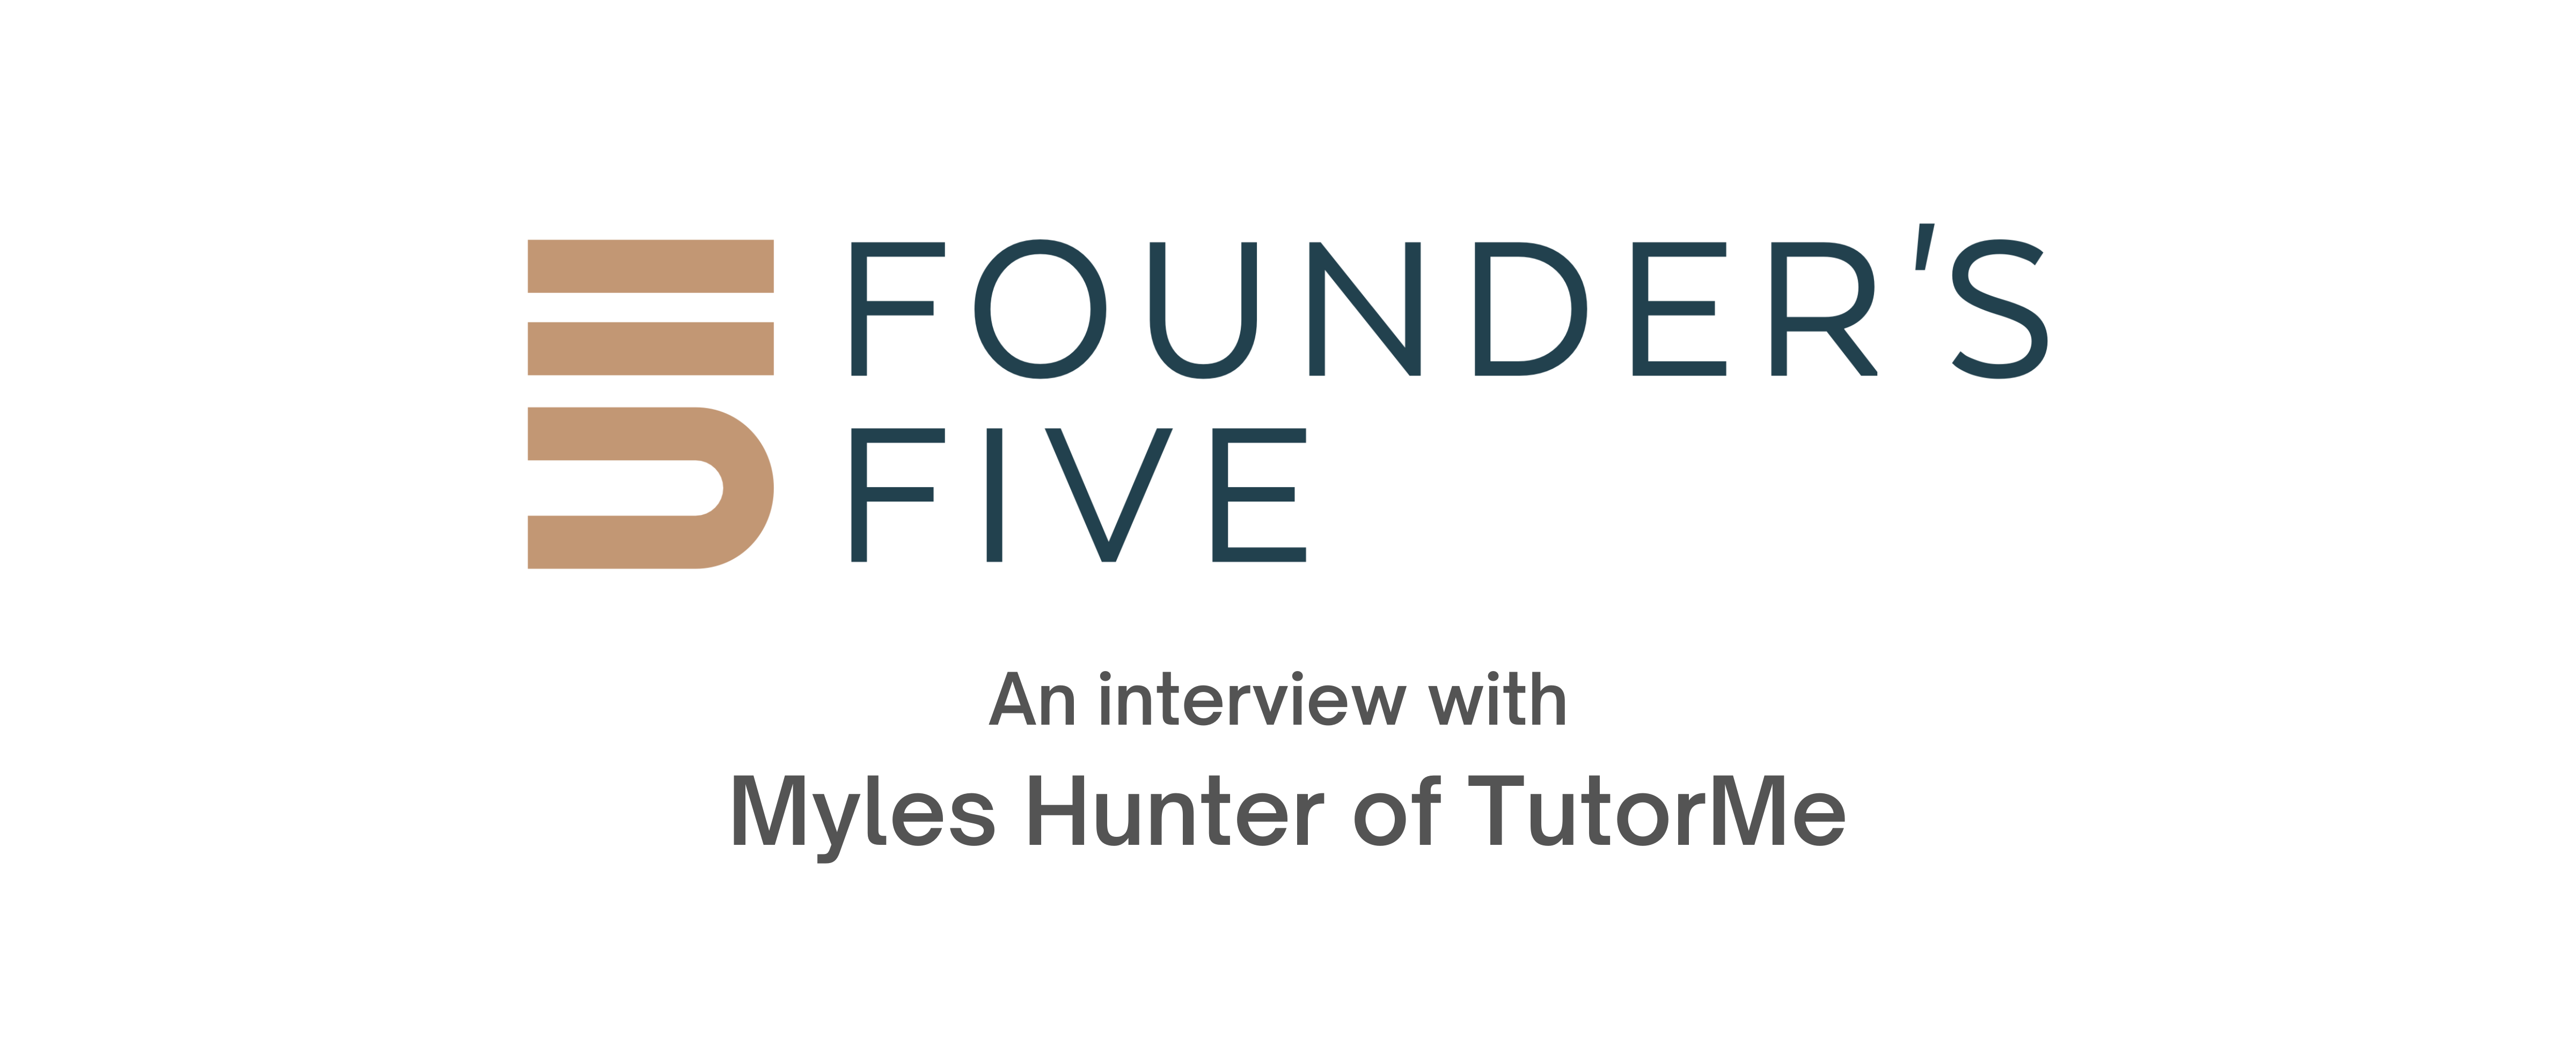 Tyton Partners Founder's Five An interview with Myles Hunter of TutorMe